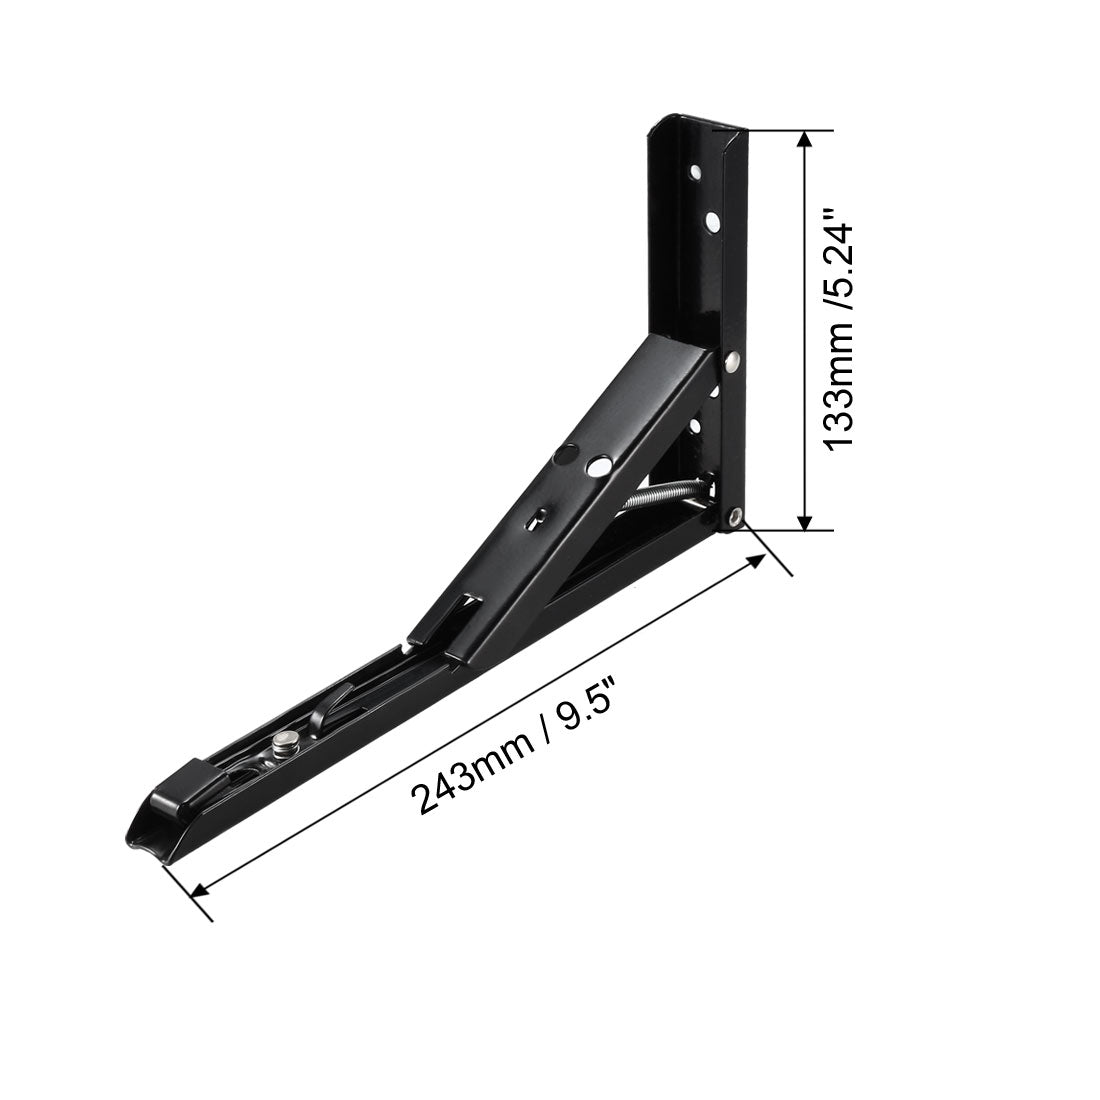 uxcell Uxcell Folding Bracket 9.5 inch 243mm for Shelves Table Desk Wall Mounted Support Collapsible Long Release Arm Space Saving Carbon Steel